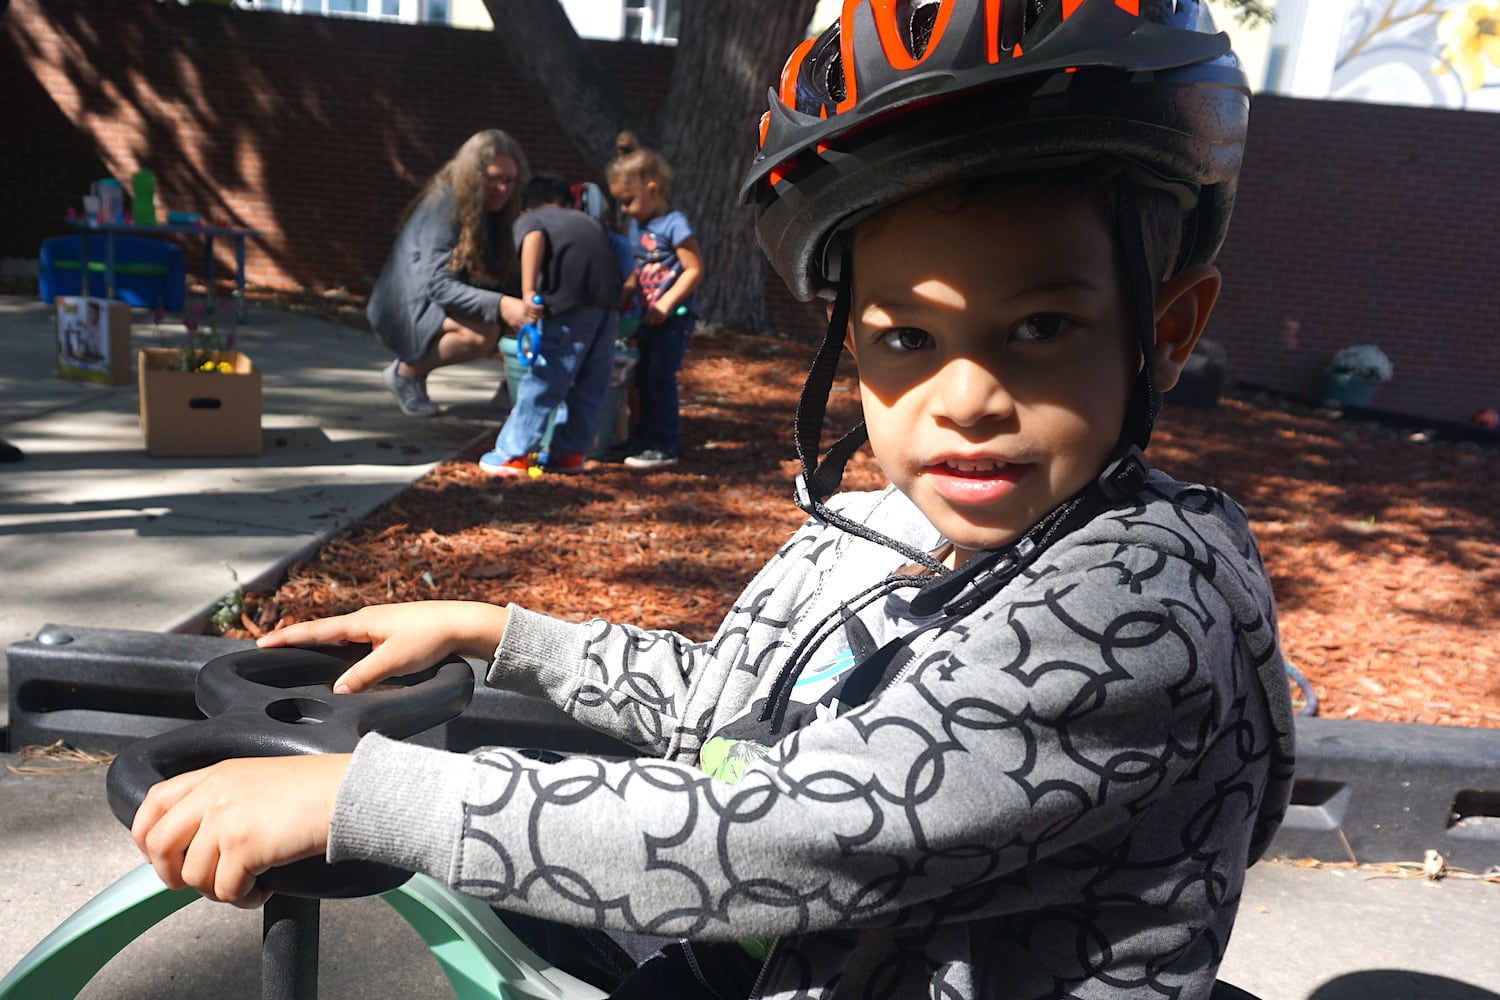 A boy rides a tricycle on the playground of the preschool at Laradon in north Denver.